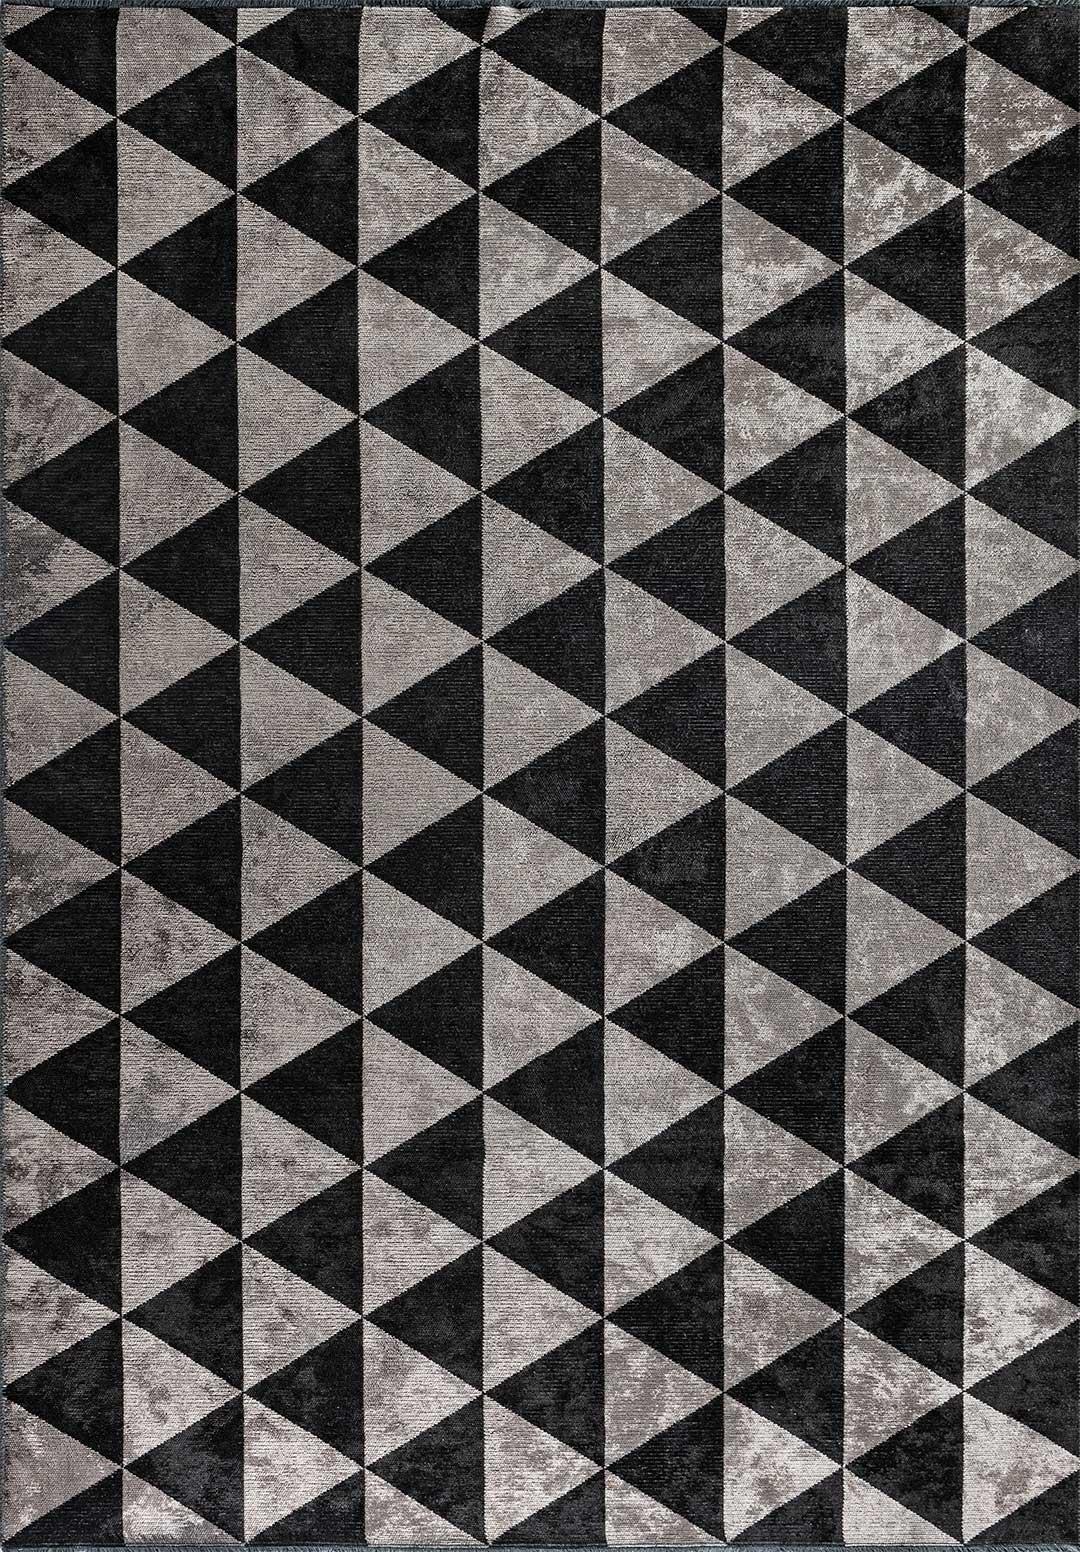 Turkish Silver Gray and Black Triangle Diamond Geometric Pattern Rug with Shine For Sale